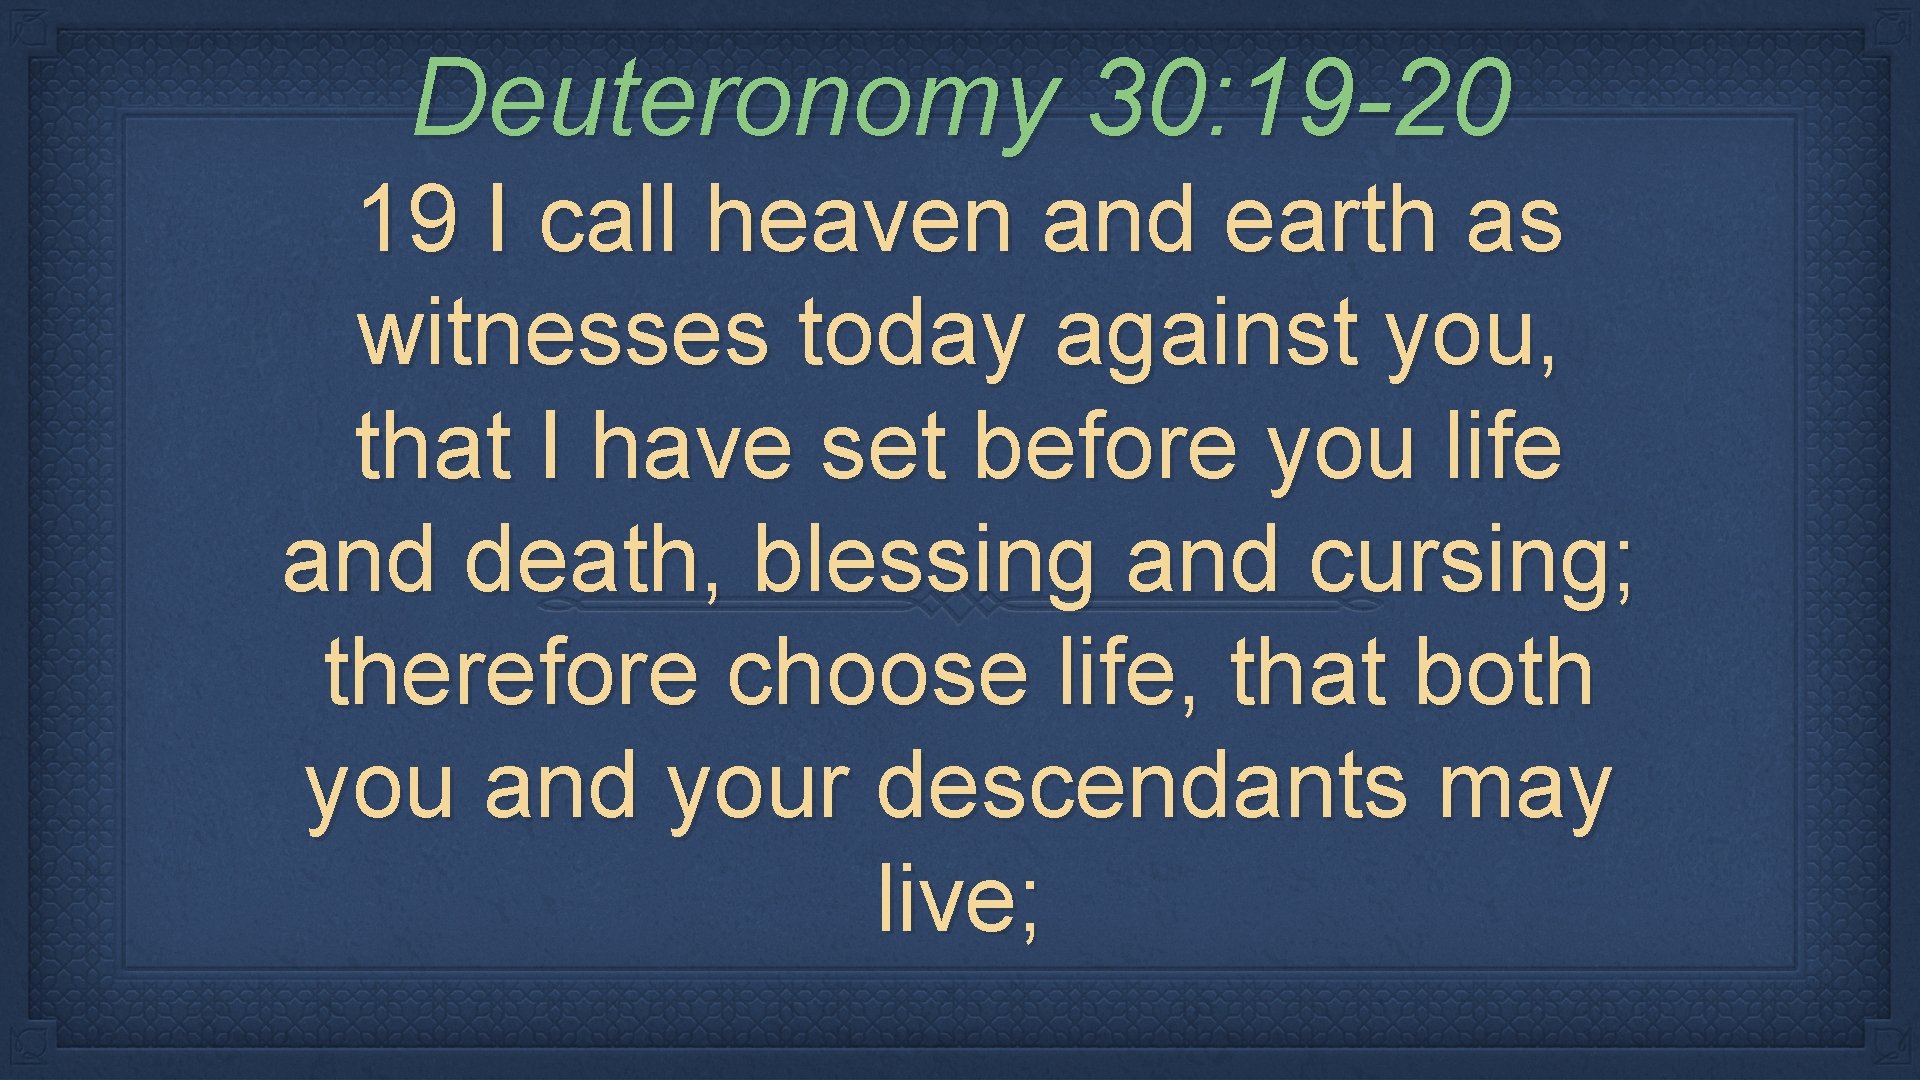 Deuteronomy 30: 19 -20 19 I call heaven and earth as witnesses today against